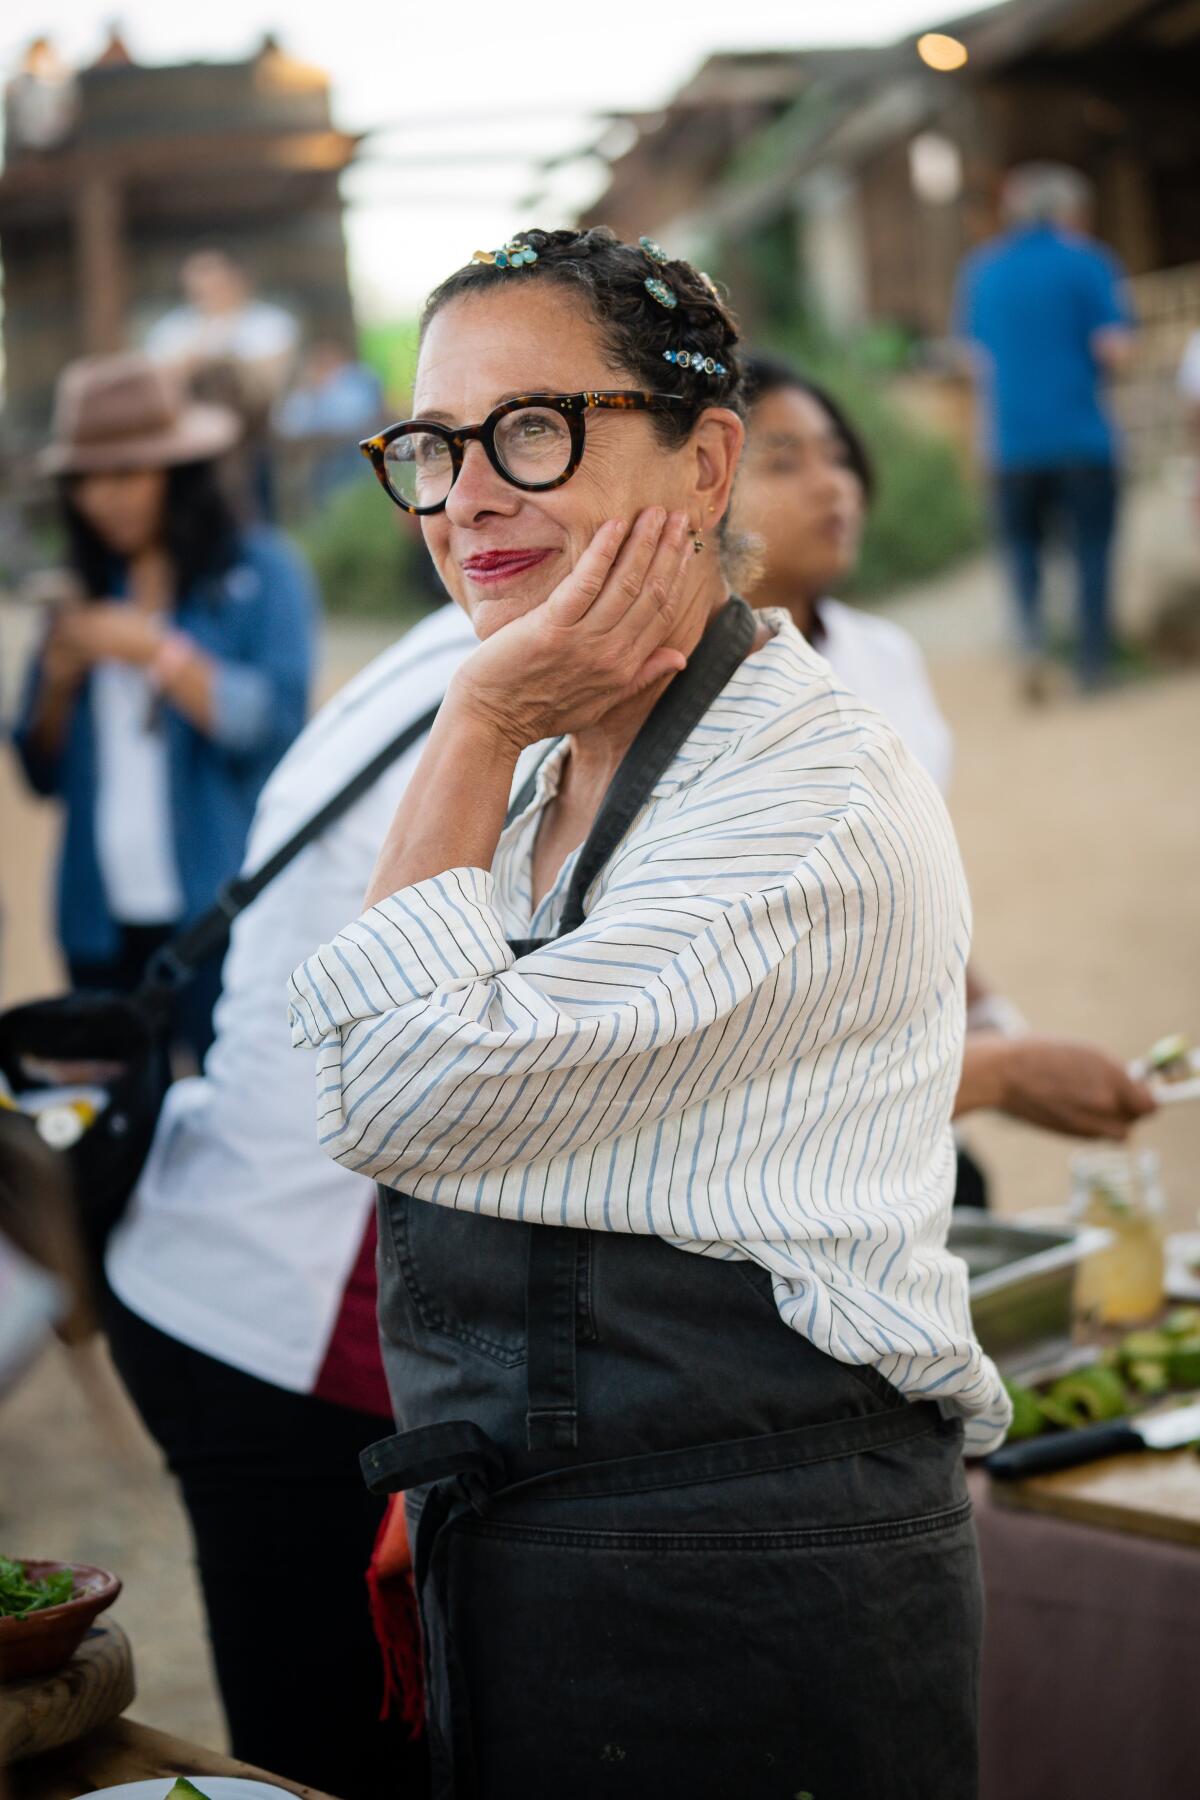 Los Angeles-based chef Nancy Silverton at the 2019 Valle Food & Wine Festival